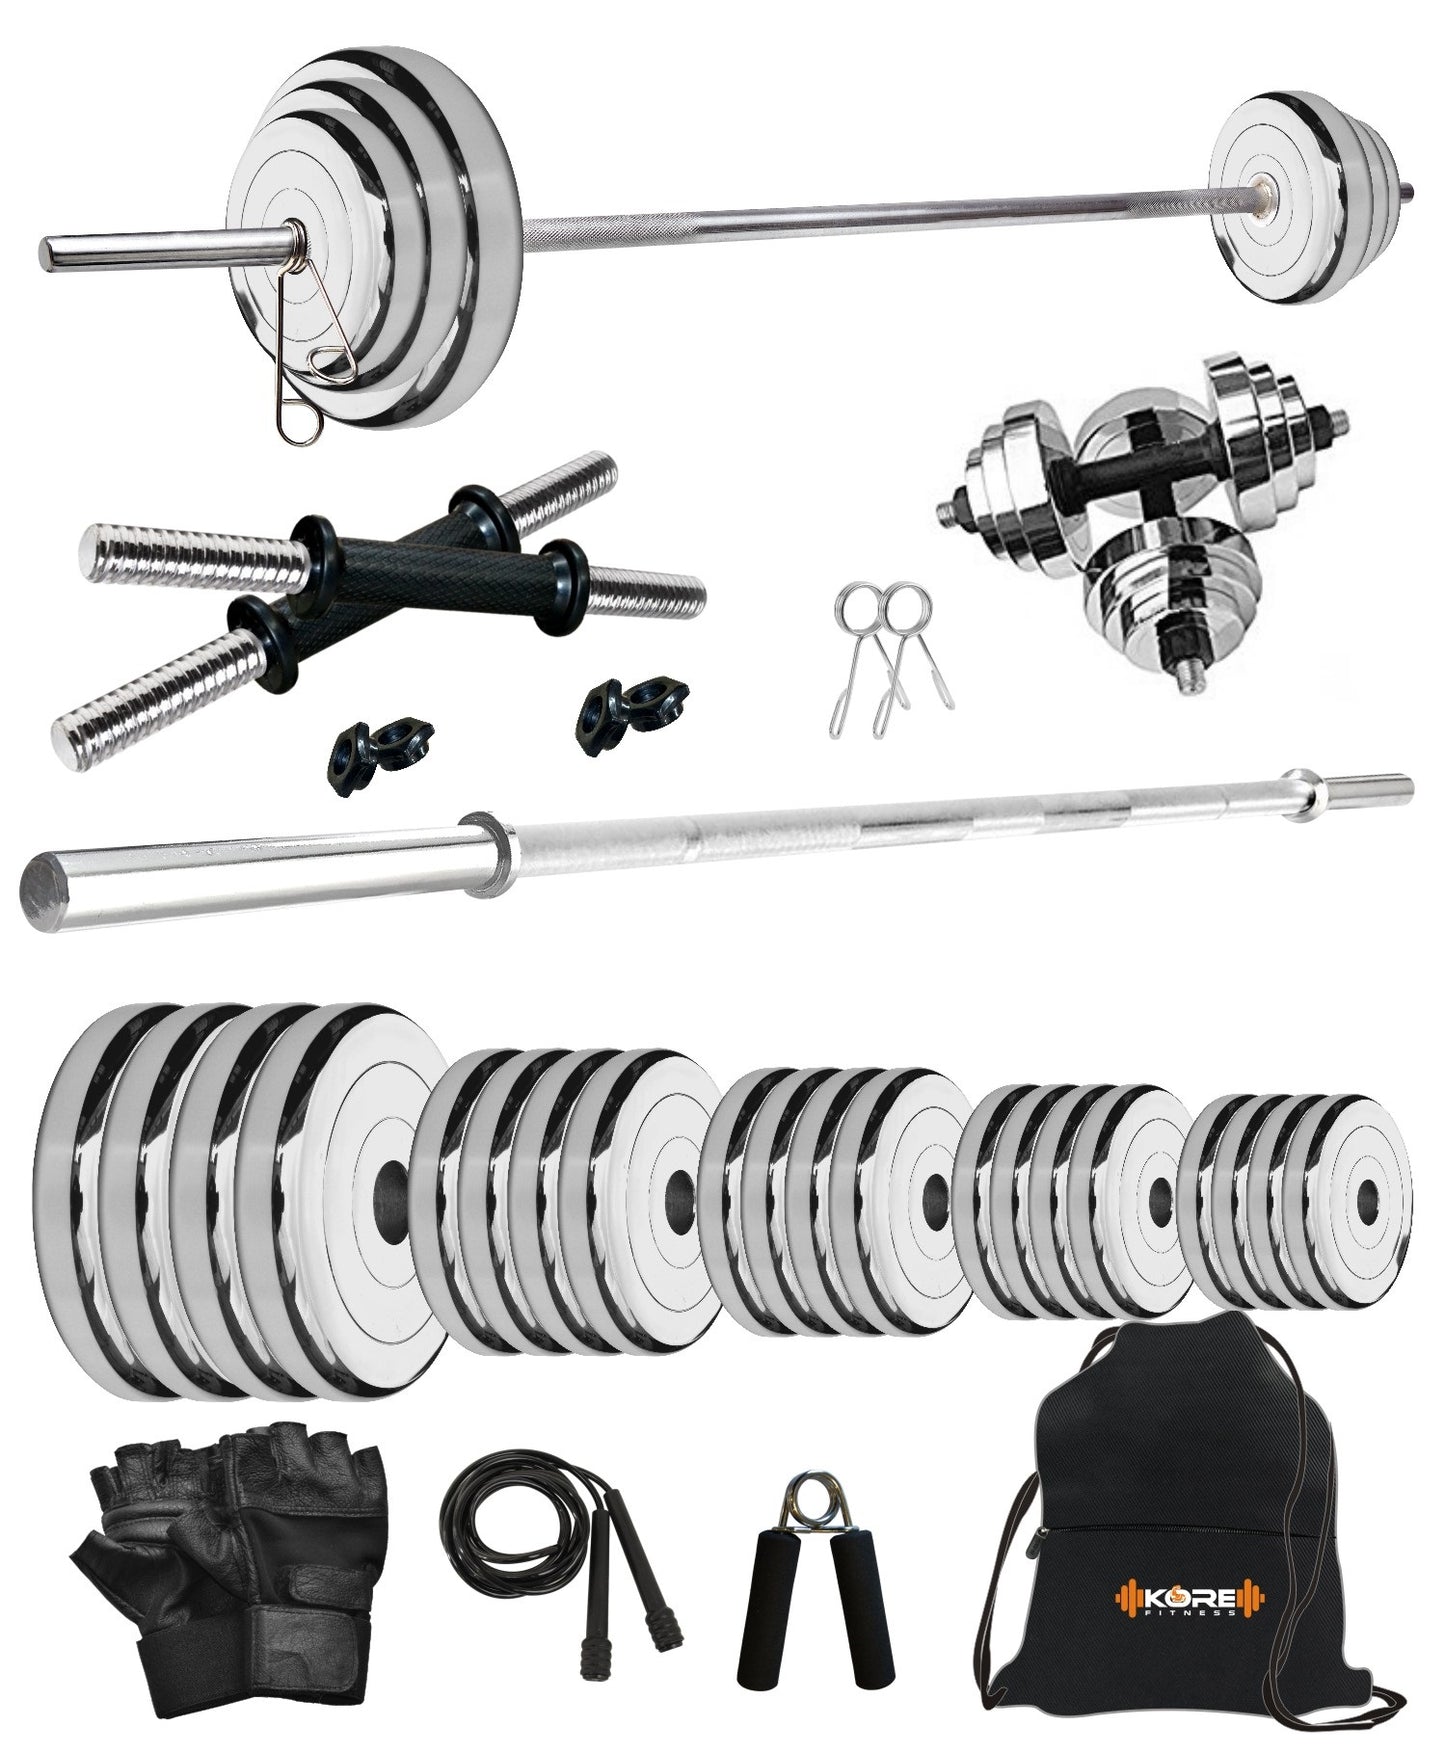 Kore Professional Steel 10-100 kg Home Gym Set with One 4 Ft Plain and One Pair Dumbbell Rods with Gym Accessories (SP-COMBO9)